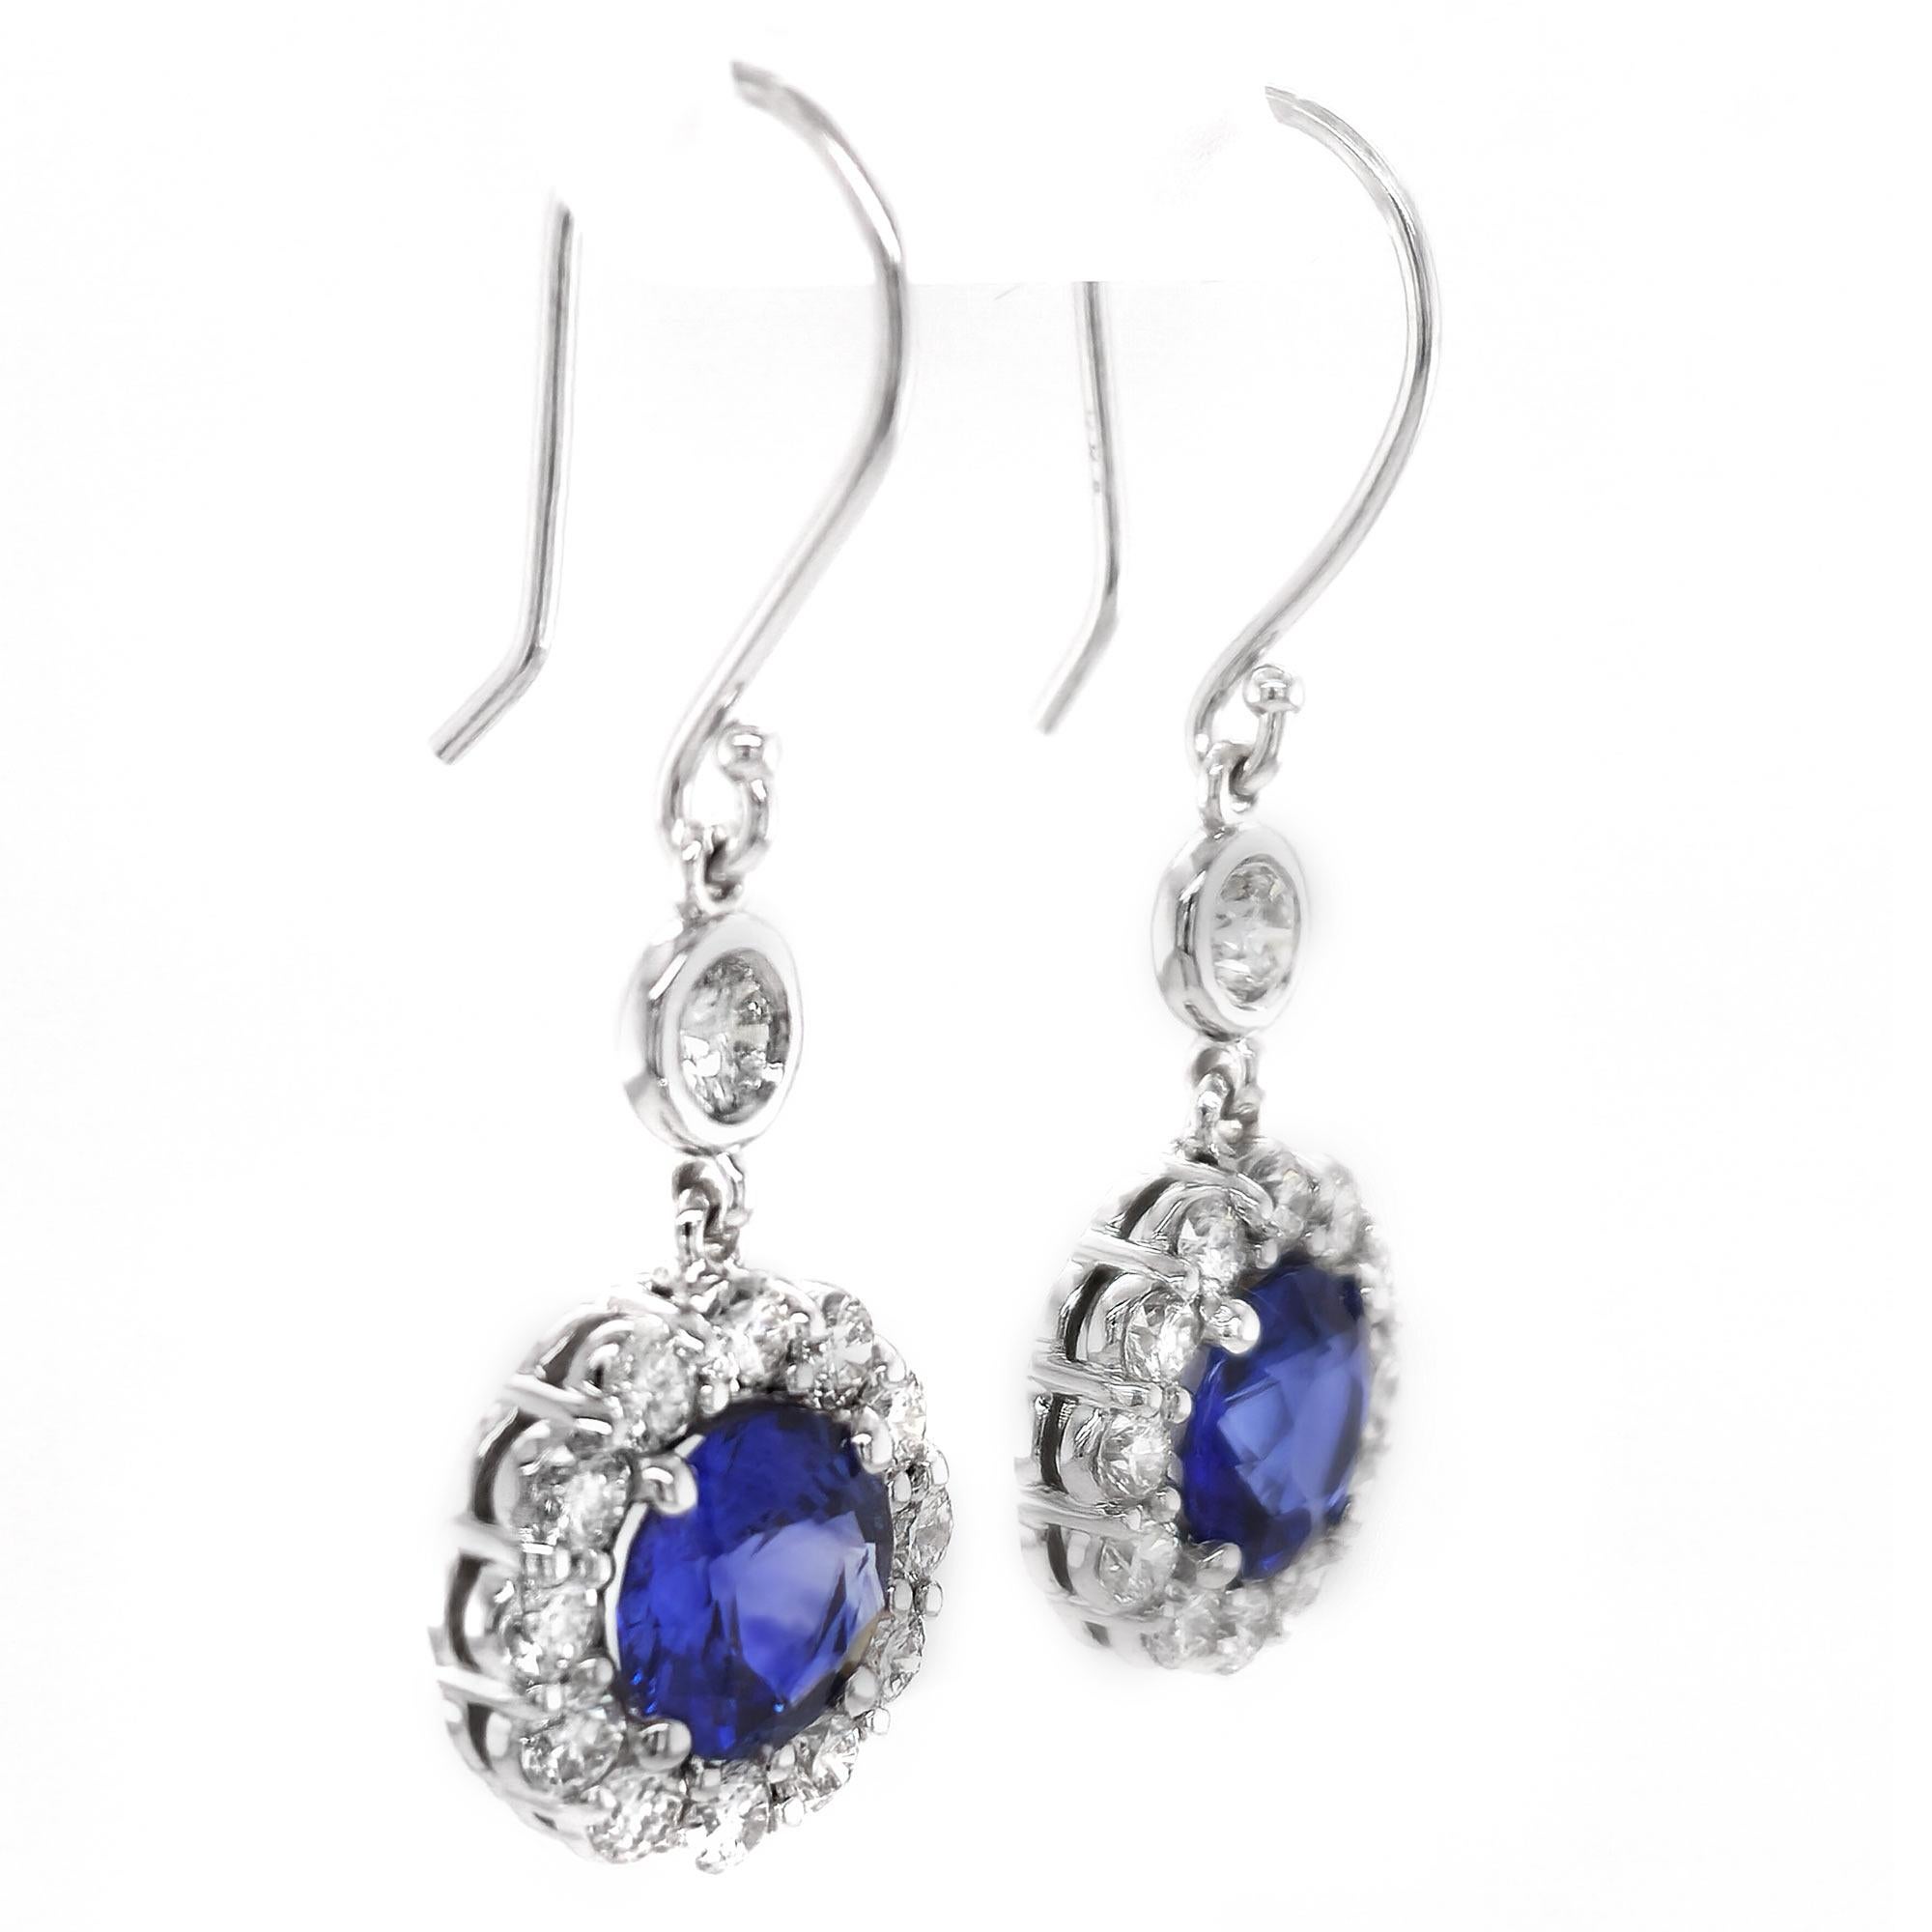 These 'Eyes of the Ocean' rare Blue Sapphire earrings are elegantly placed in a beautifully textured white gold setting. 2.24 carats Rare Blue Sapphire Earrings are brilliantly set with 18K White Gold, creating tremendous contrast between the luster